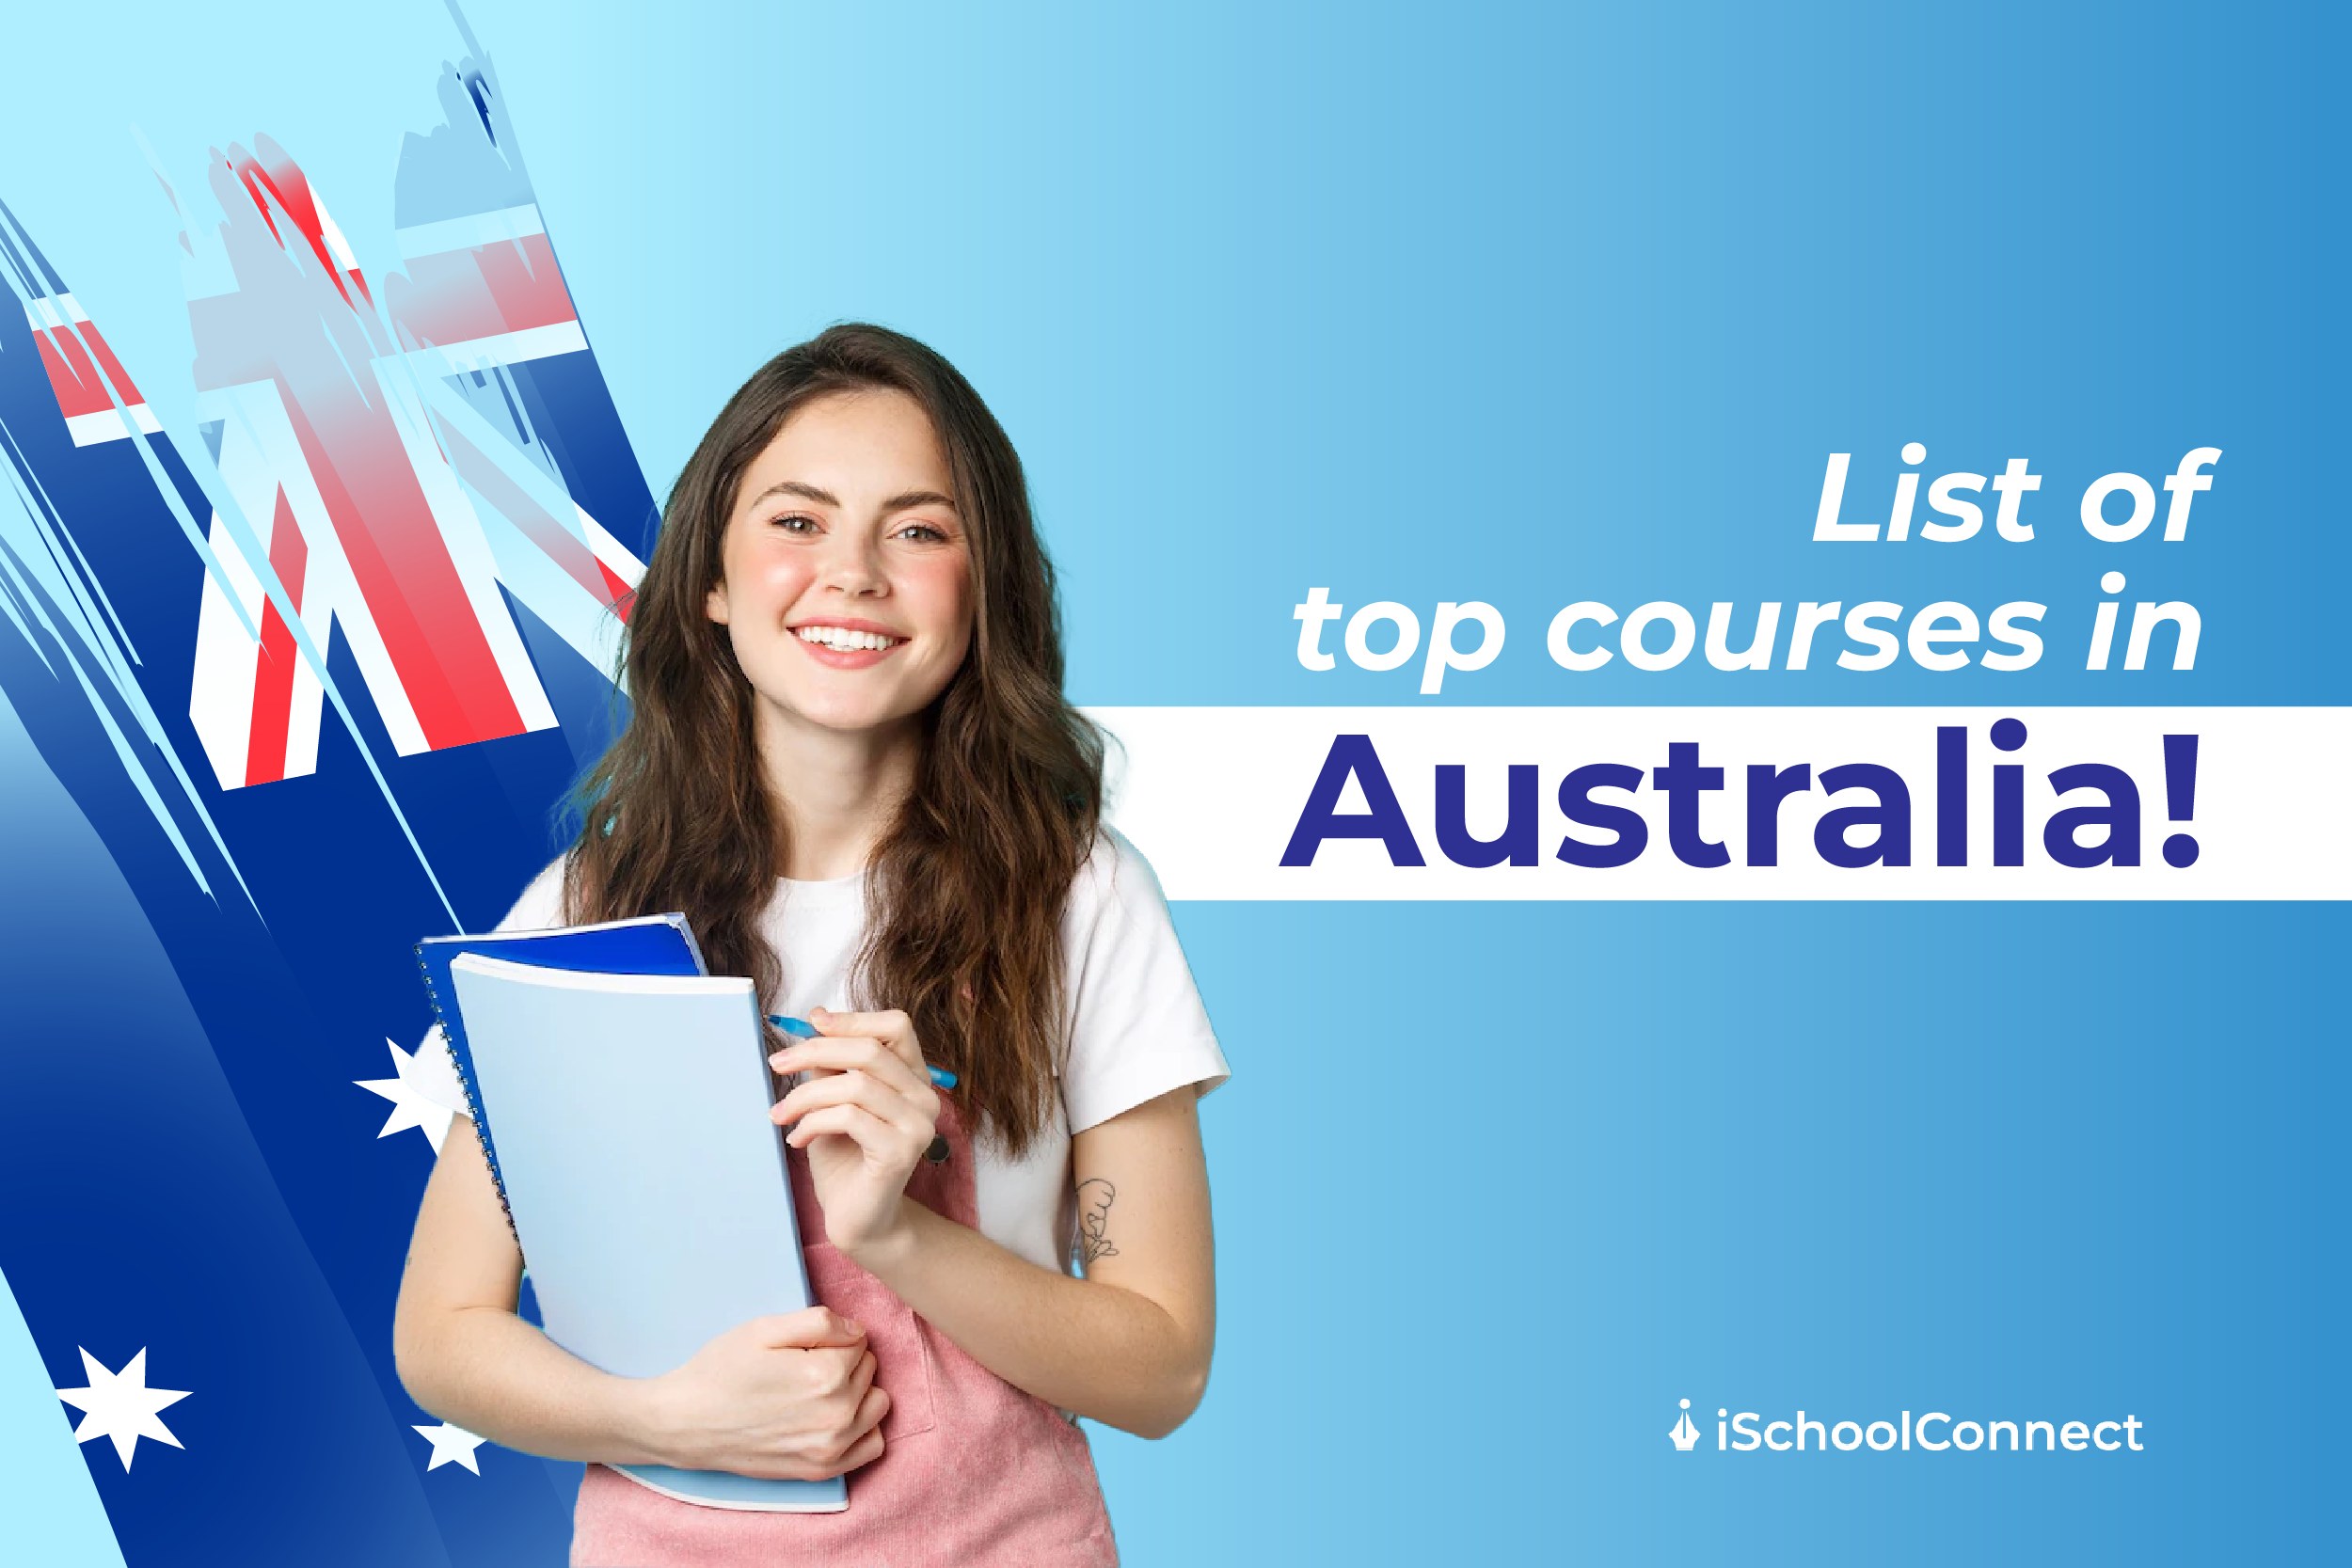 Top courses in Australia for international students